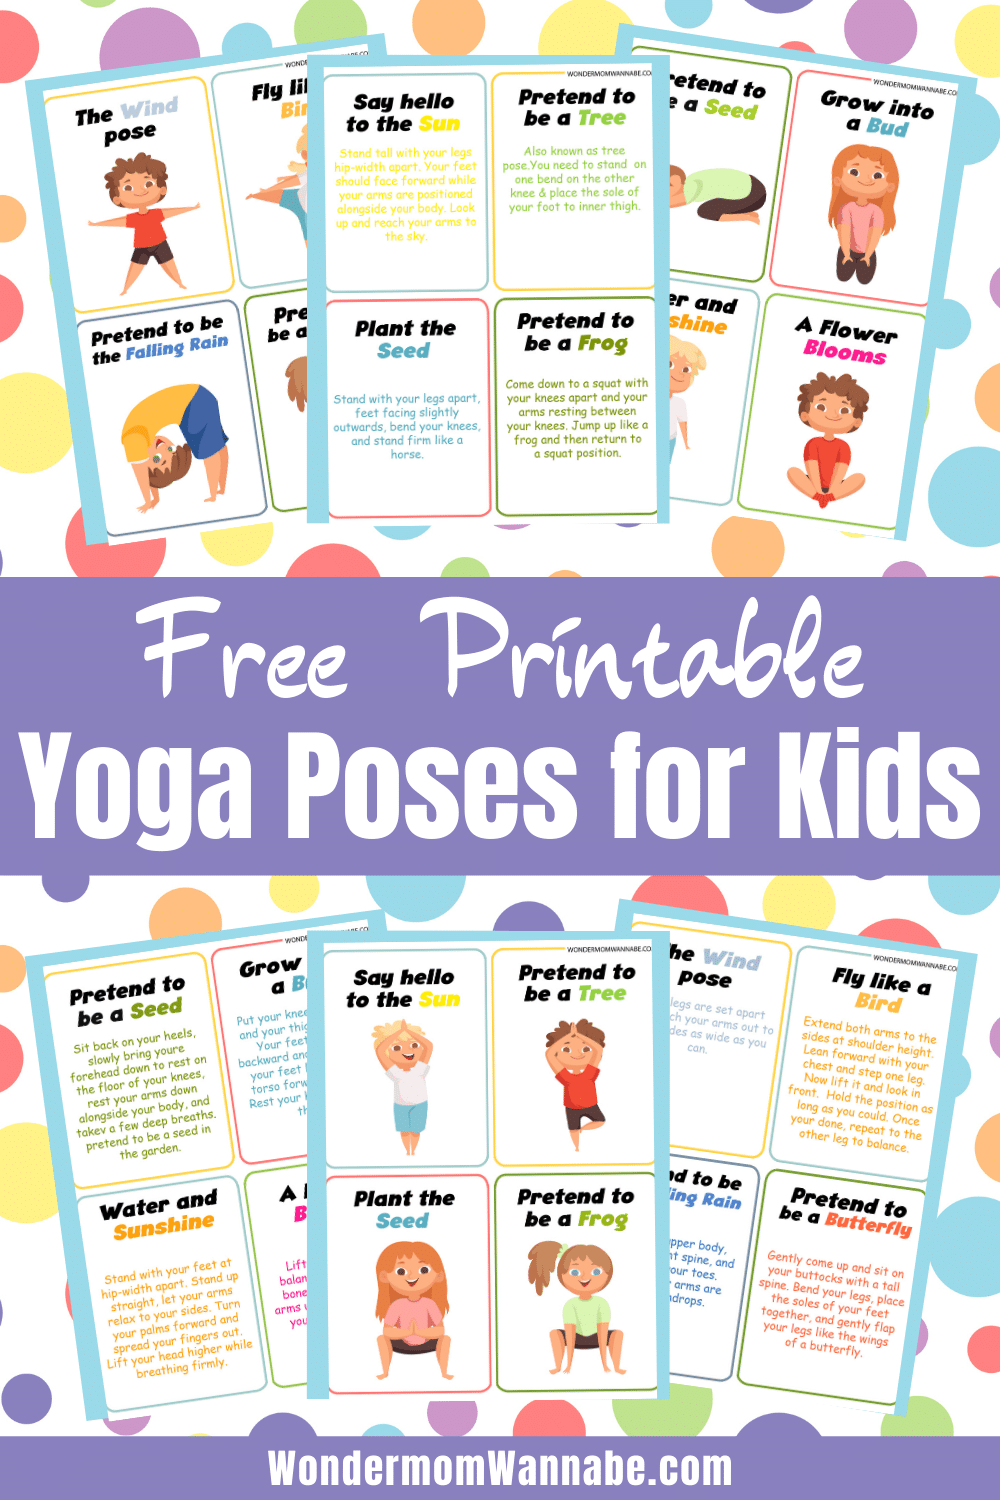 Use these free spring-themed printable yoga poses for kids to introduce your children to this healthy habit in a fun and easy way. #freeprintable #yogaposes #forkids #spring #healthykids via @wondermomwannab